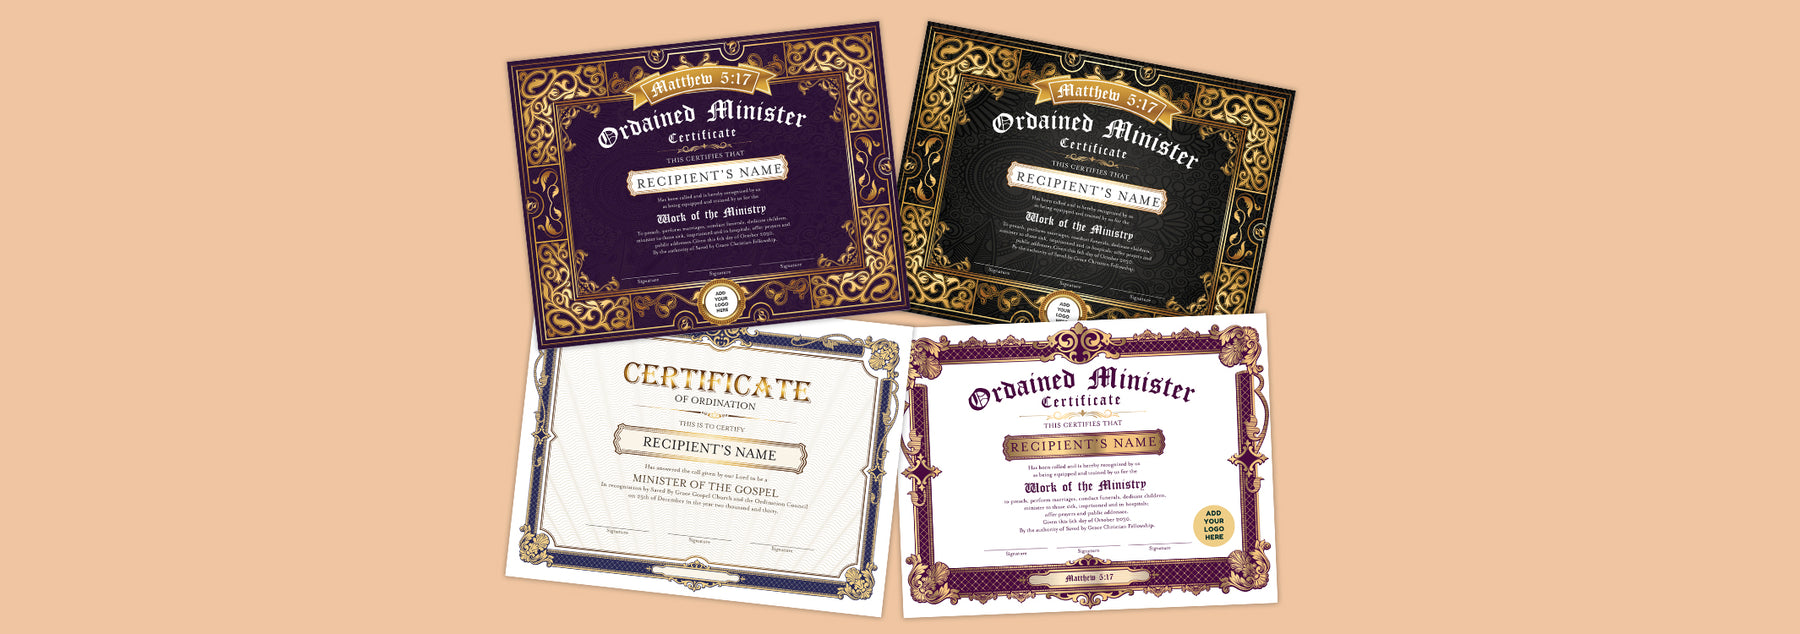 The Importance of Having a Certificate of Ordination in Ministry